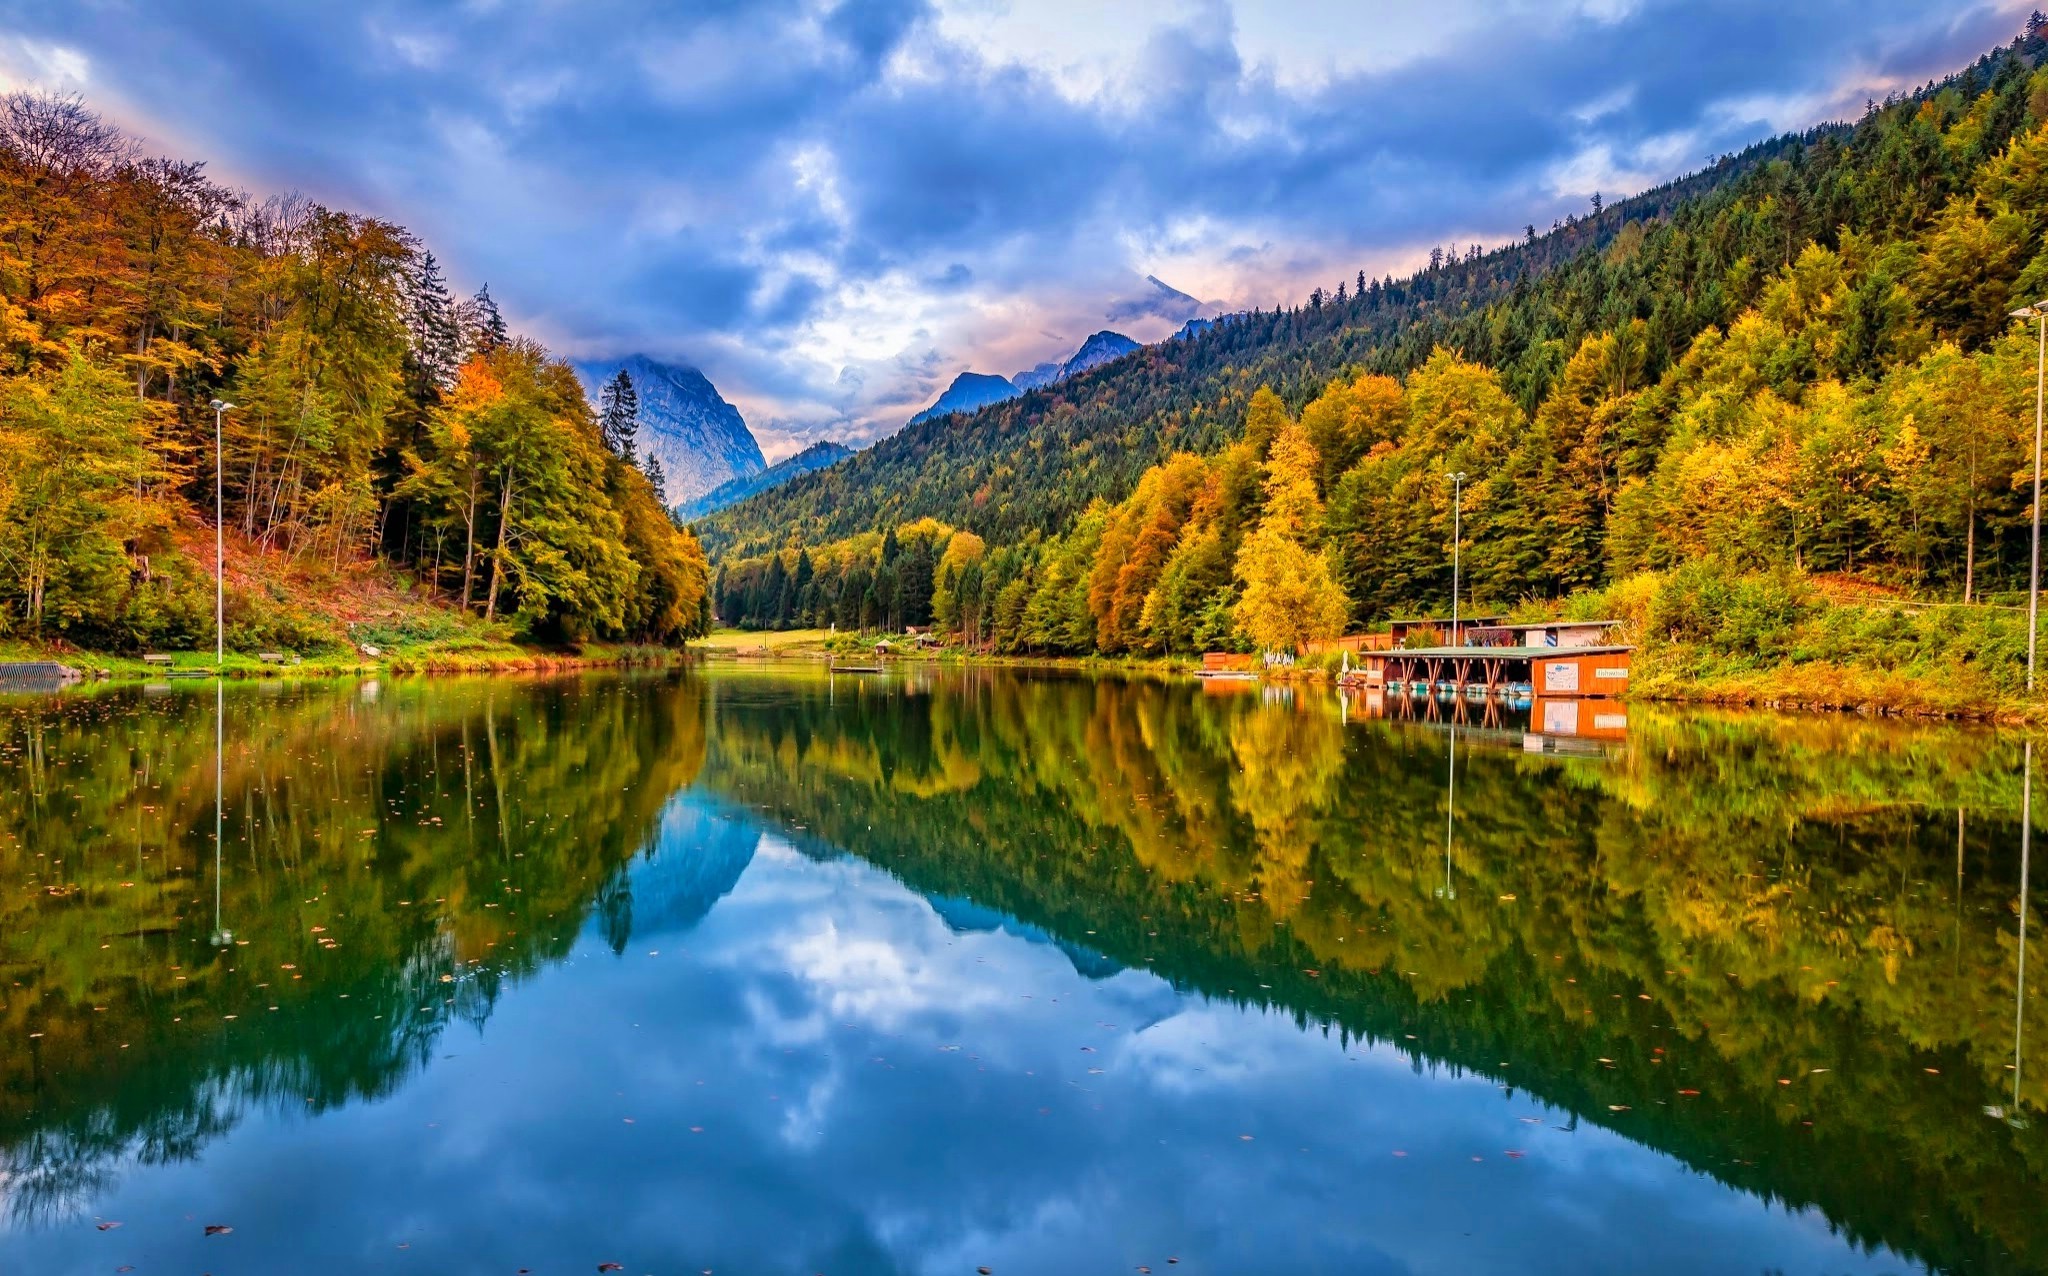 lake, Nature, Forest, Landscape, Mountain, Fall, Reflection, Water